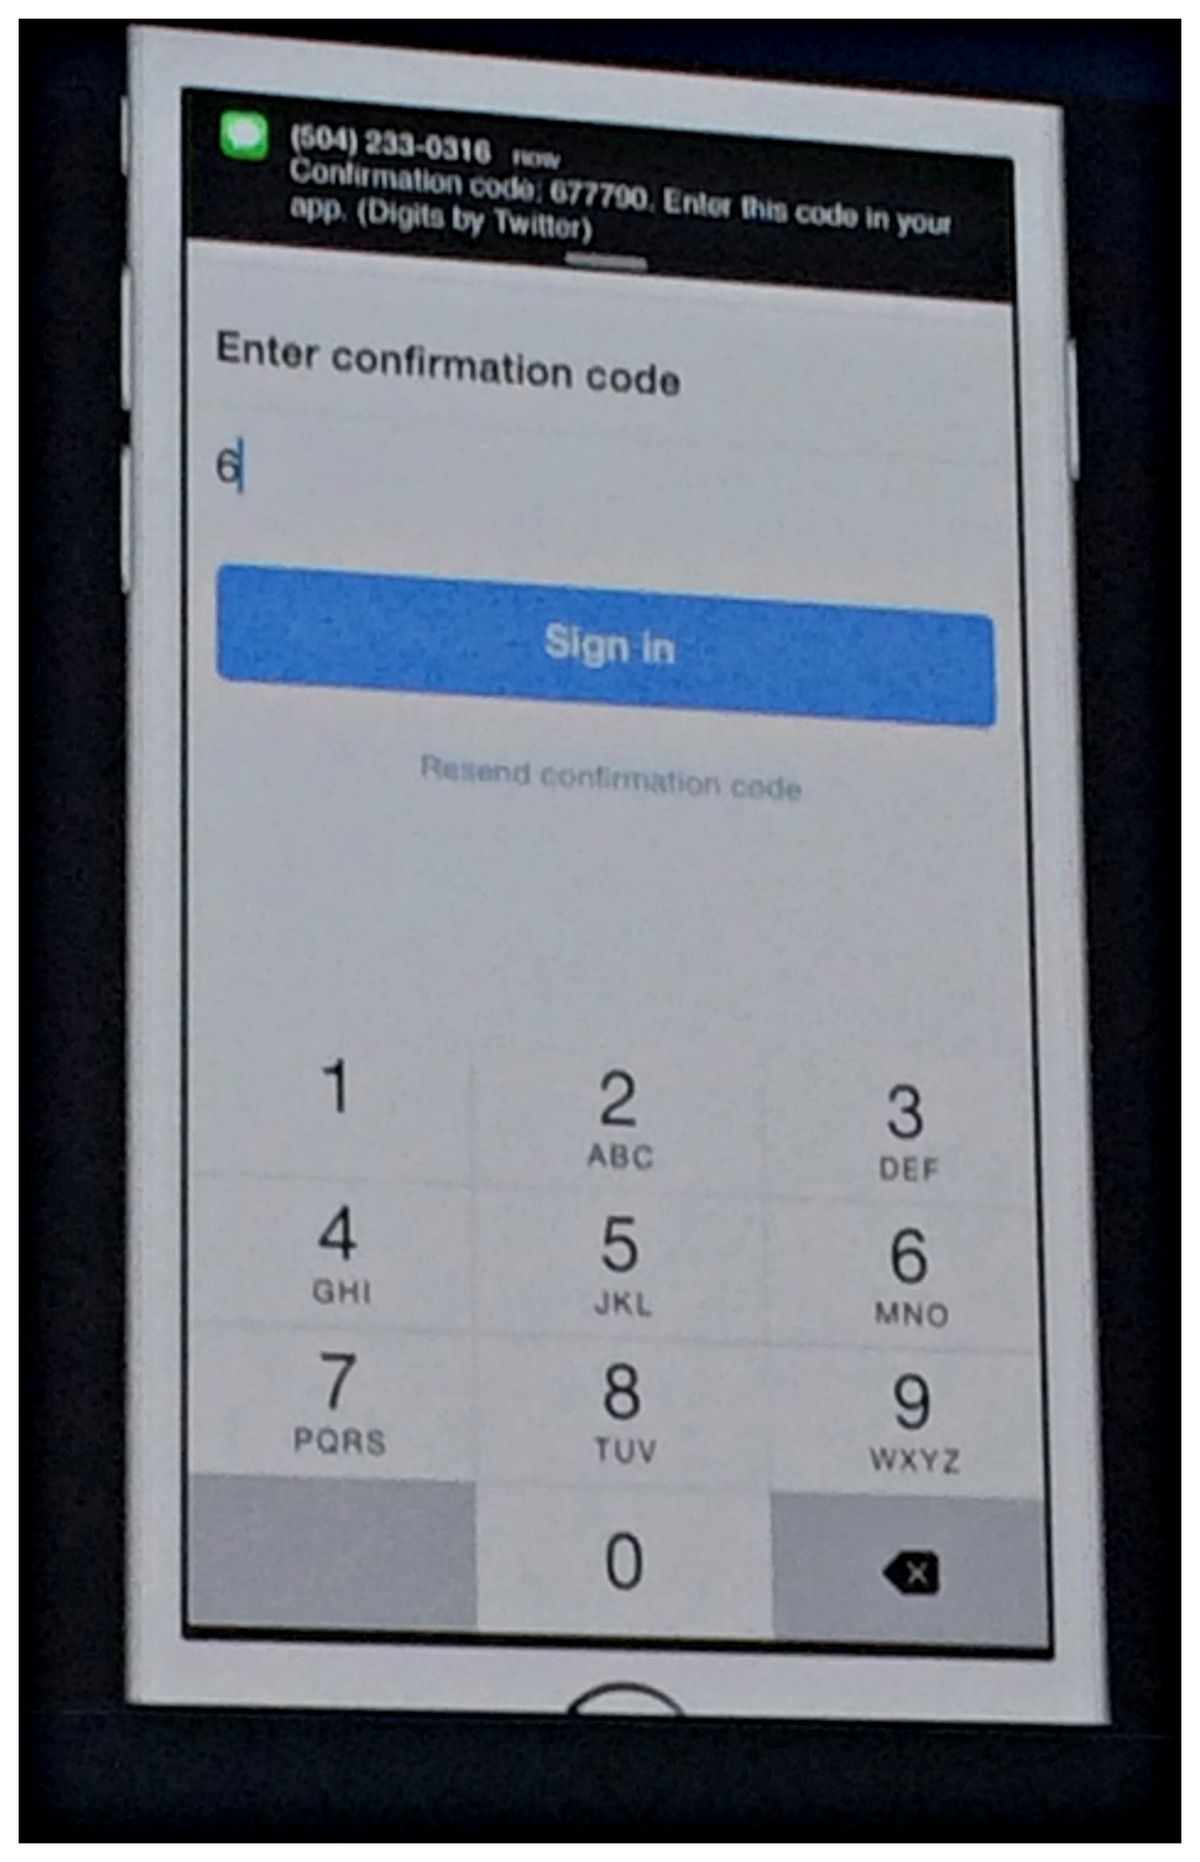  A look at Digits, Twitter’s new mobile number sign-in feature.